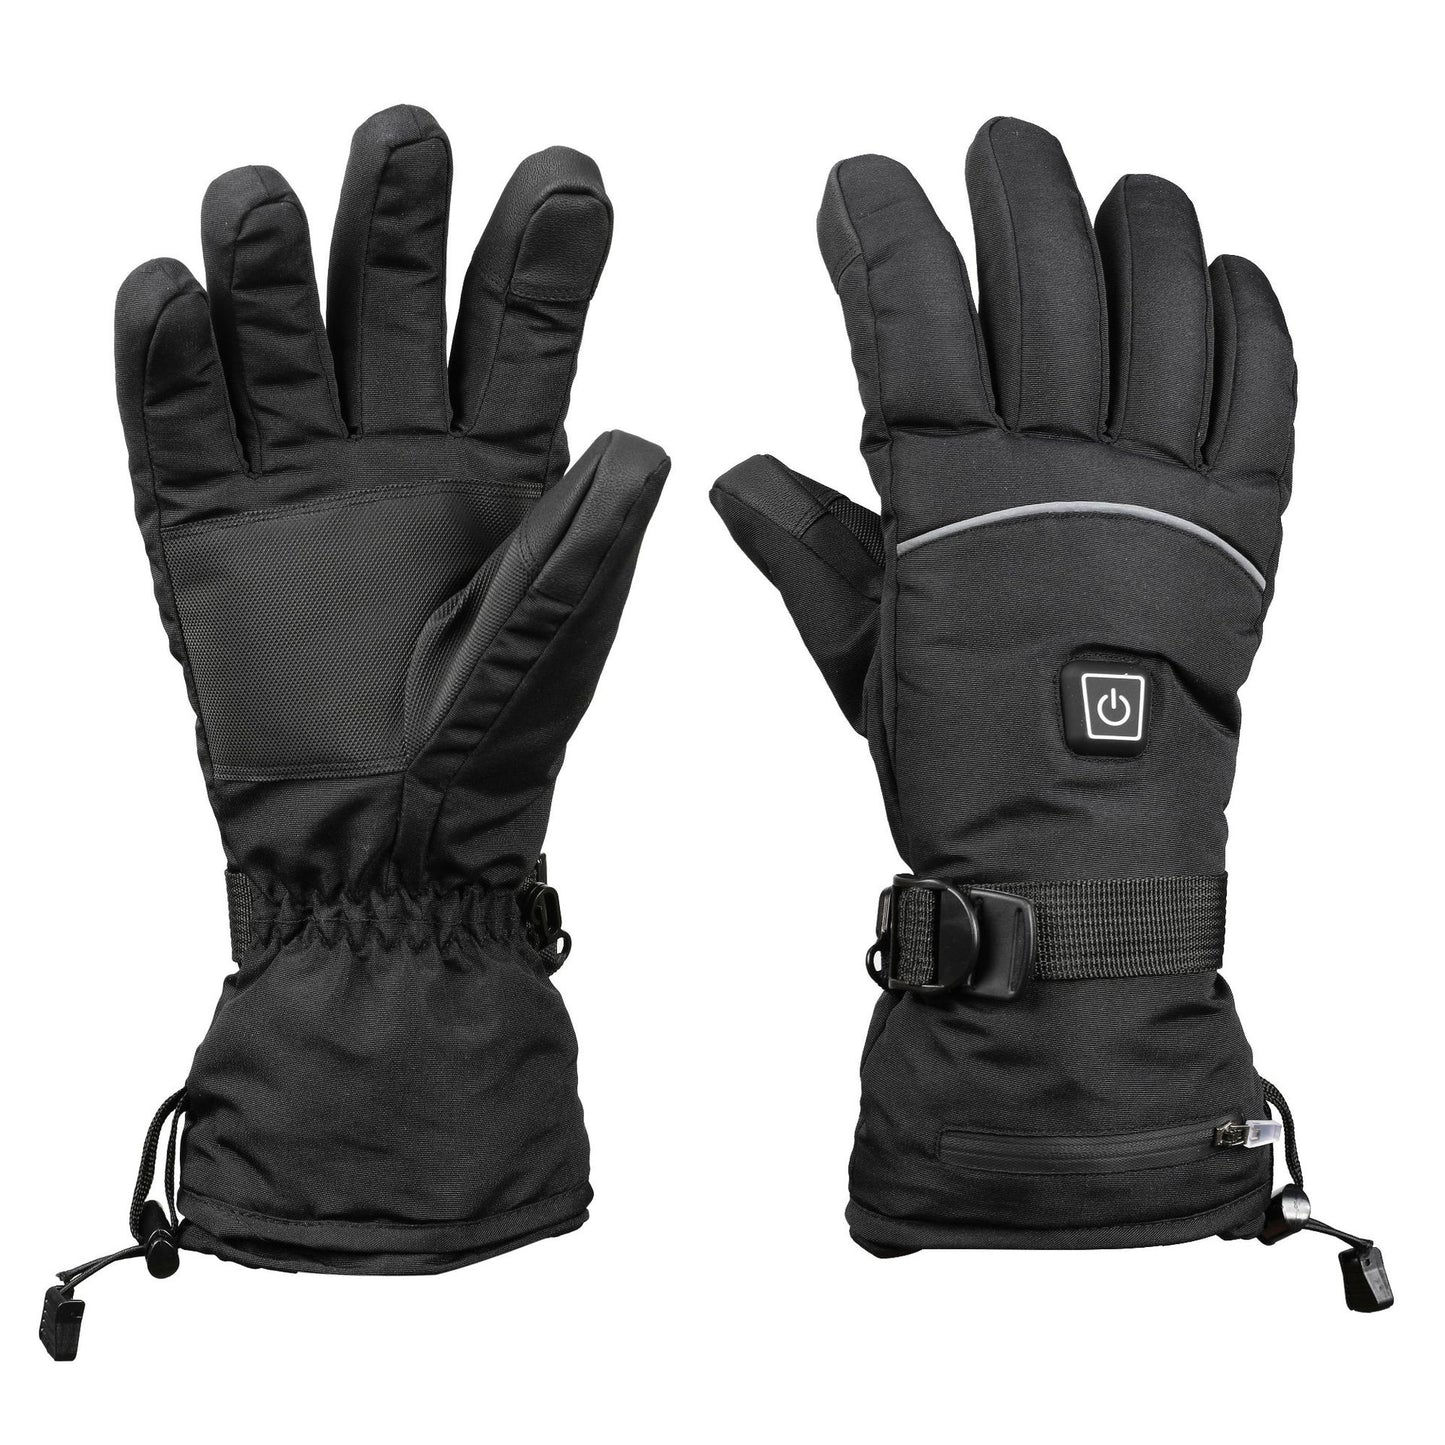 Velvet Thermal Insulation Three-gear Temperature Control, Touch Screen Heating Gloves